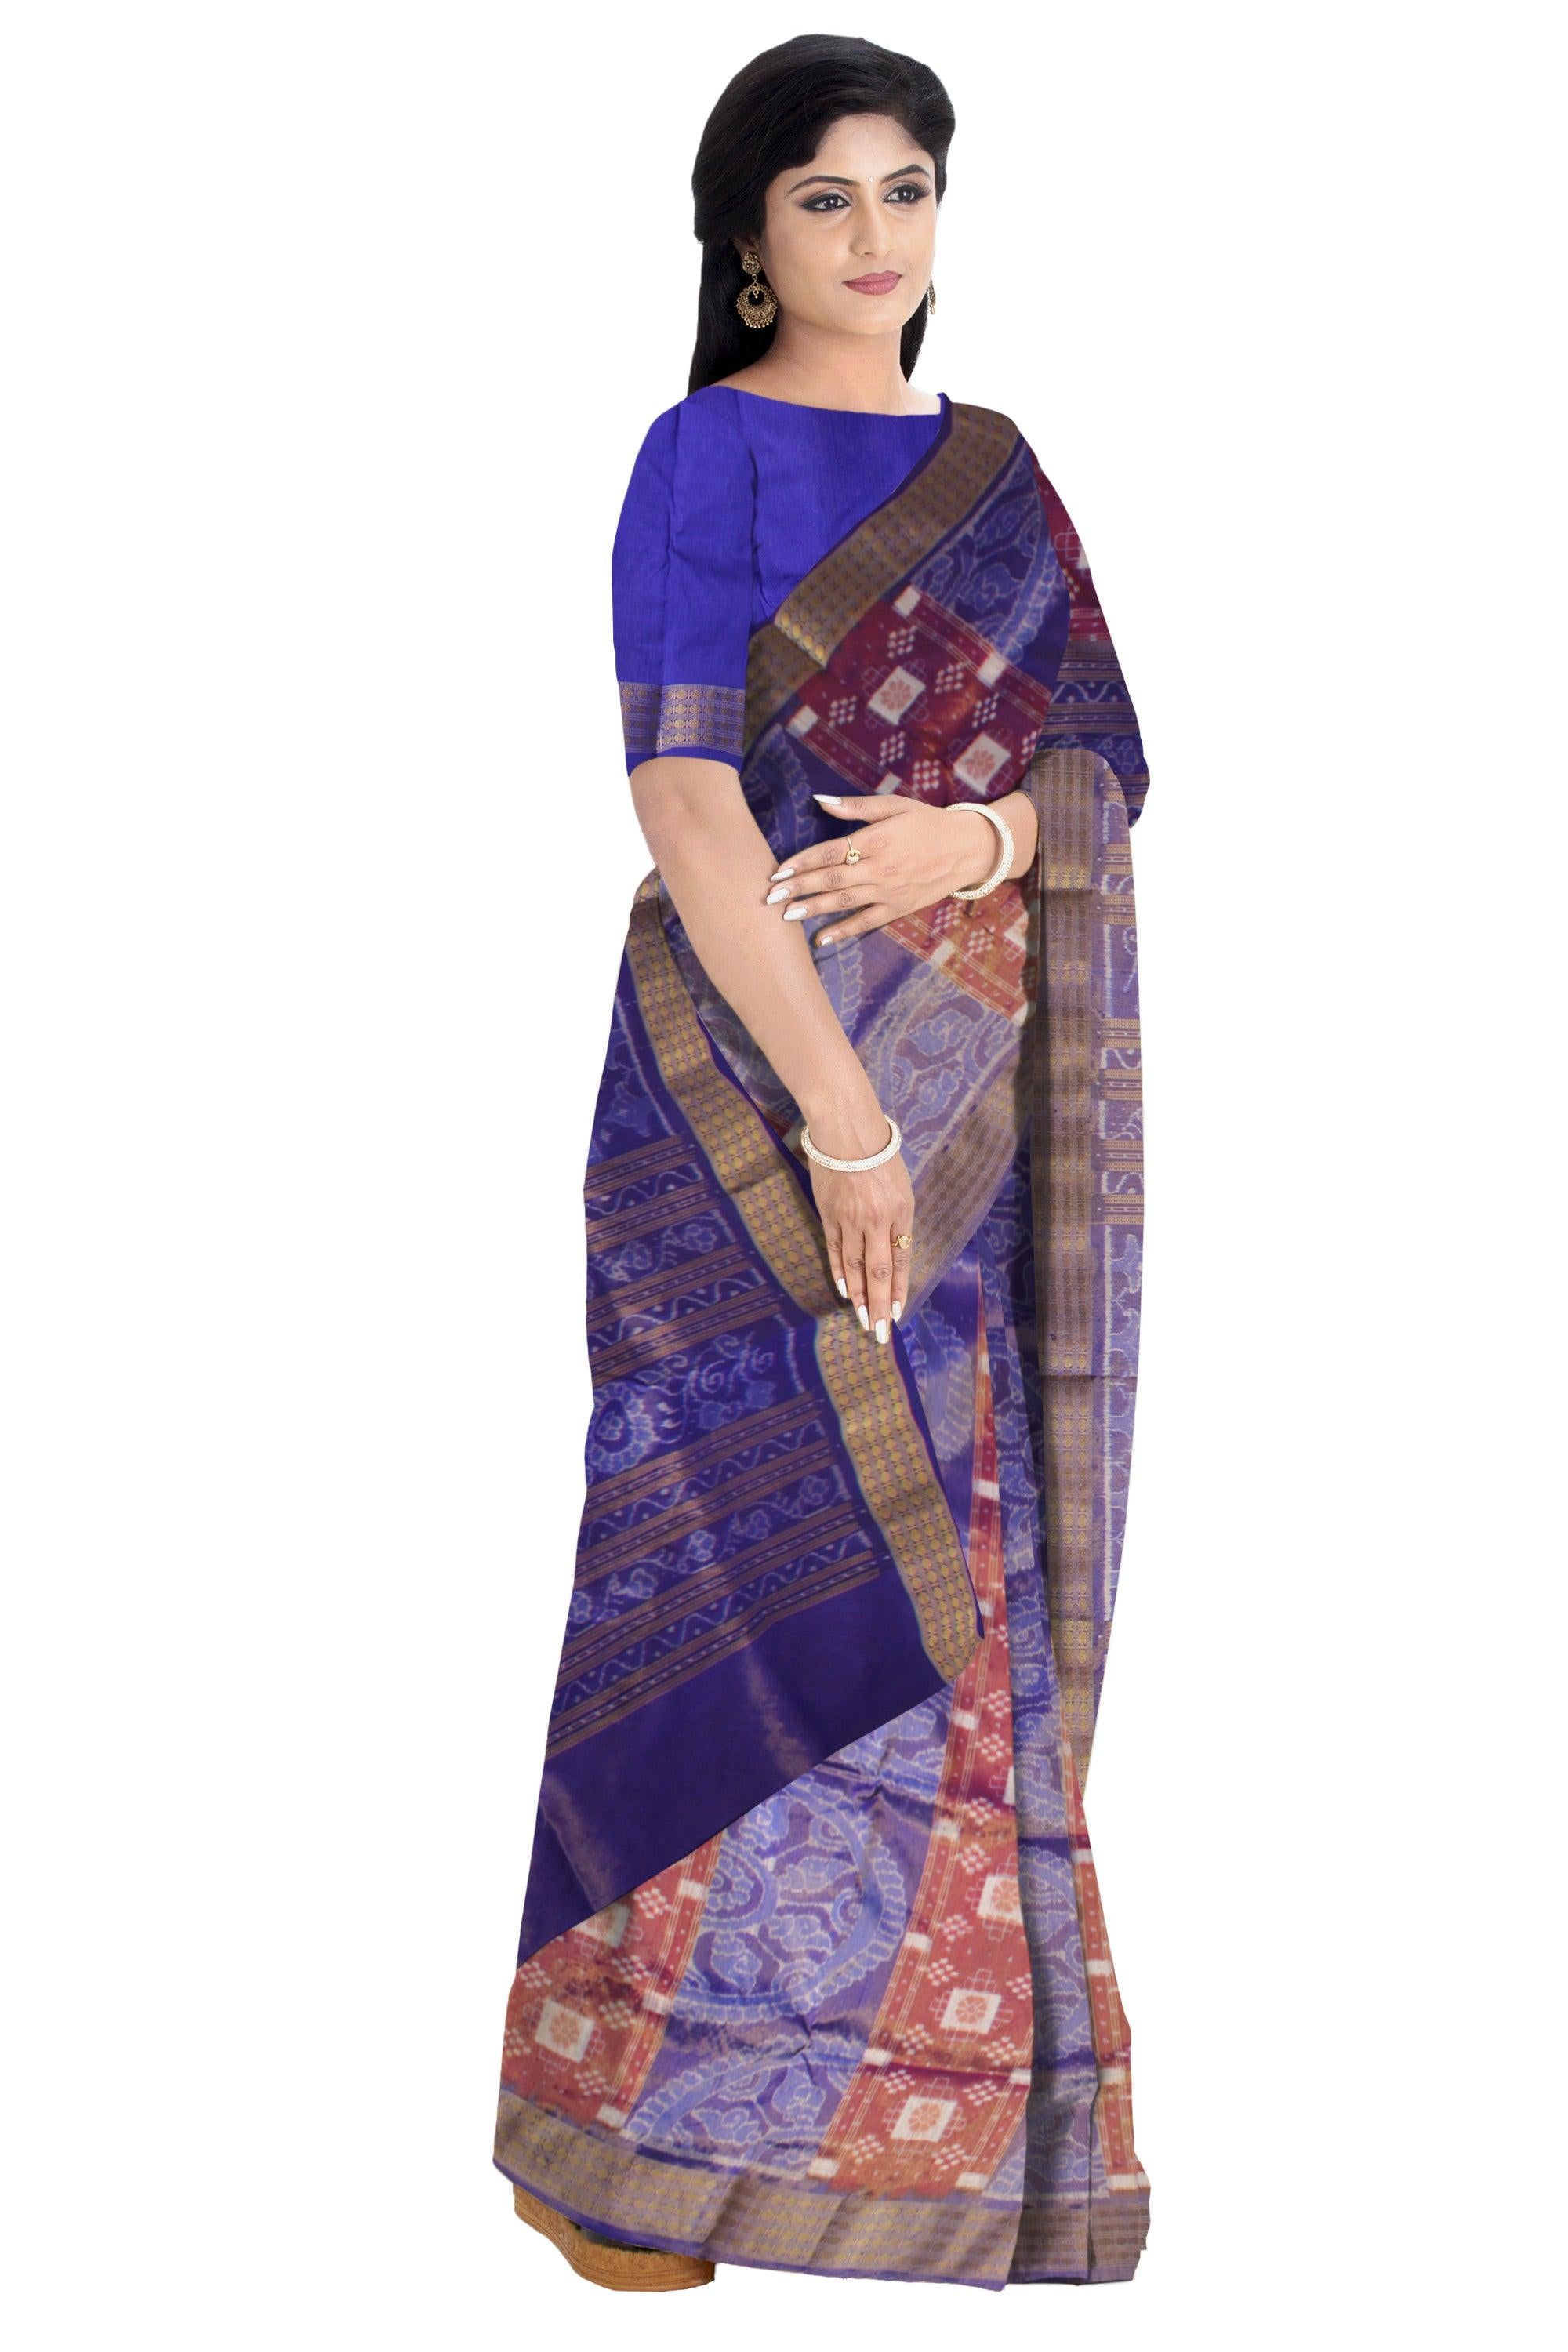 LATEST MARRAIGE COLLECTION PURE TISSUE SILK SAREE IS LIGHT BLUE AND DARK-ORANGE COLOR BASE, COMES WITH MATCHING BLOUSE PIECE. - Koshali Arts & Crafts Enterprise